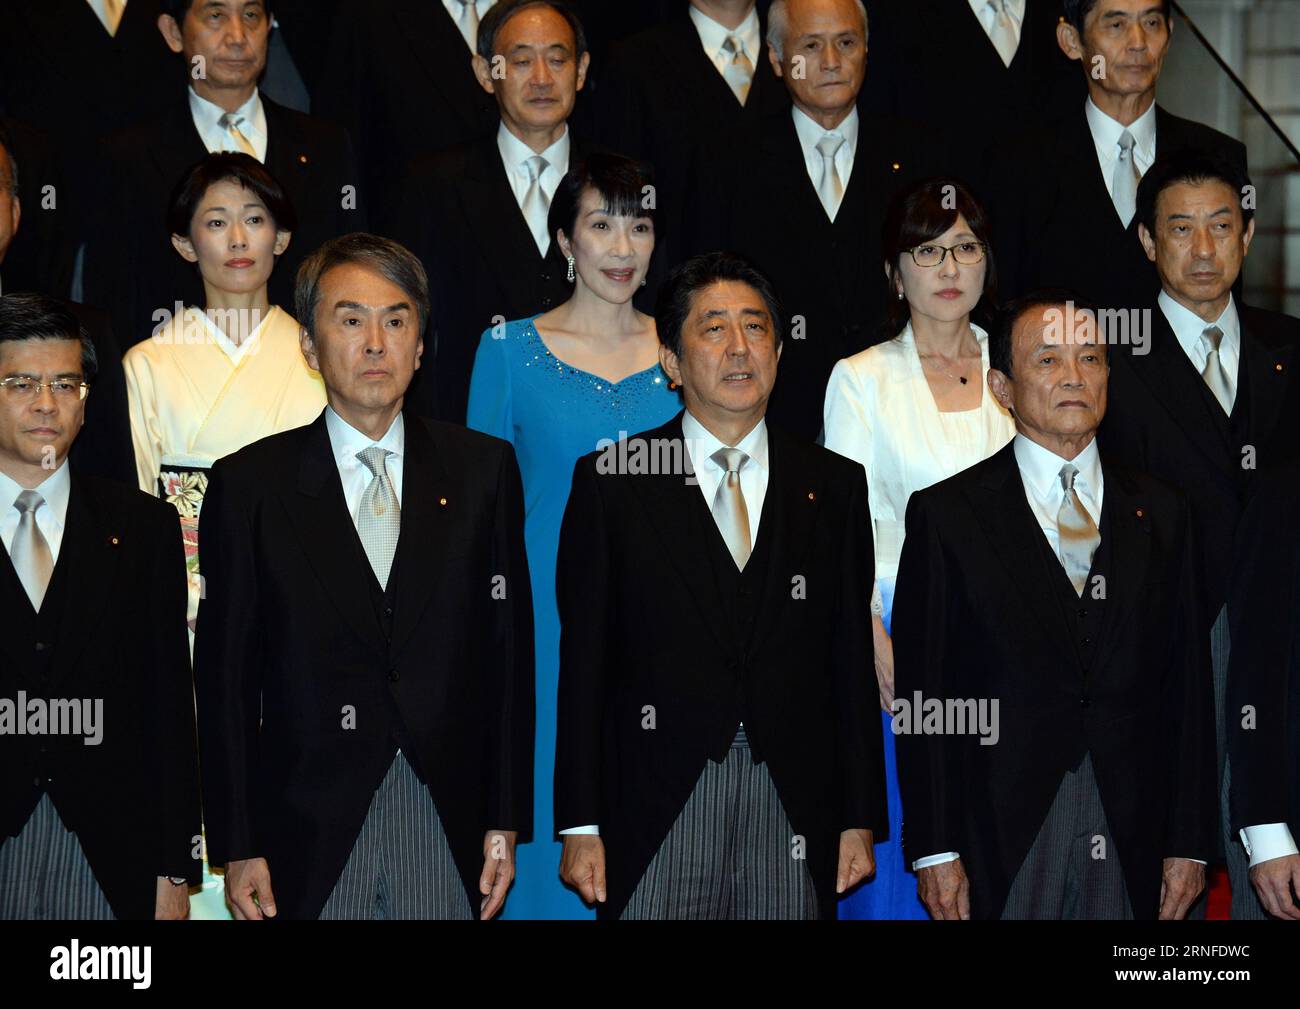 (160803) -- TOKYO, Aug. 3, 2016 -- Japanese Prime Minister Shinzo Abe (2nd R, Front) and cabinet ministers pose during a photo session at Abe s official residence in Tokyo, capital of Japan, on Aug. 3, 2016. Japanese Prime Minister Shinzo Abe, in a cabinet reshuffle on Wednesday, retained almost half of his ministers in their current positions although controversially appointed Tomomi Inada, the former head of the ruling Liberal Democratic Party s Policy Research Council, to take on the defense minister portfolio replacing Gen Nakatani. ) (lr) JAPAN-TOKYO-CABINET-RESHUFFLE MaxPing PUBLICATIONx Stock Photo